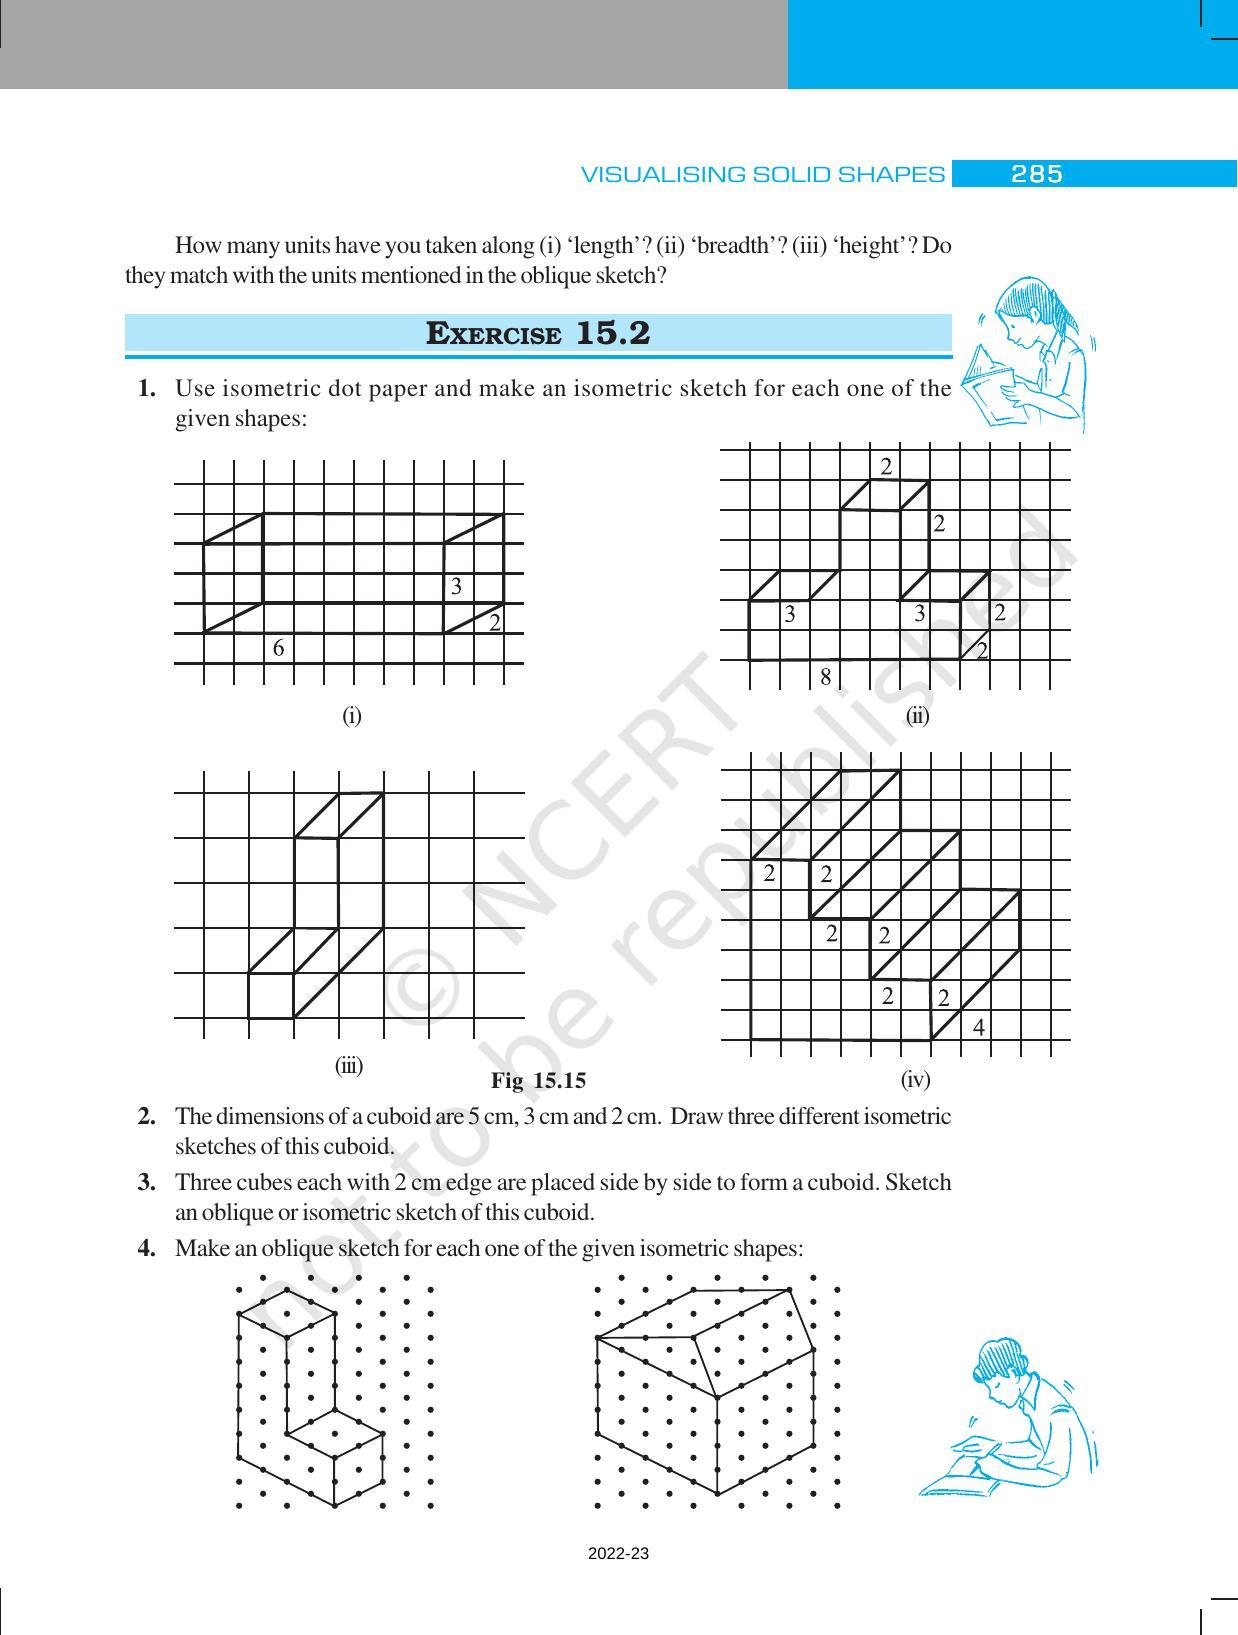 NCERT Book for Class 7 Maths: Chapter 15-Visualising Solid Shapes - Page 9